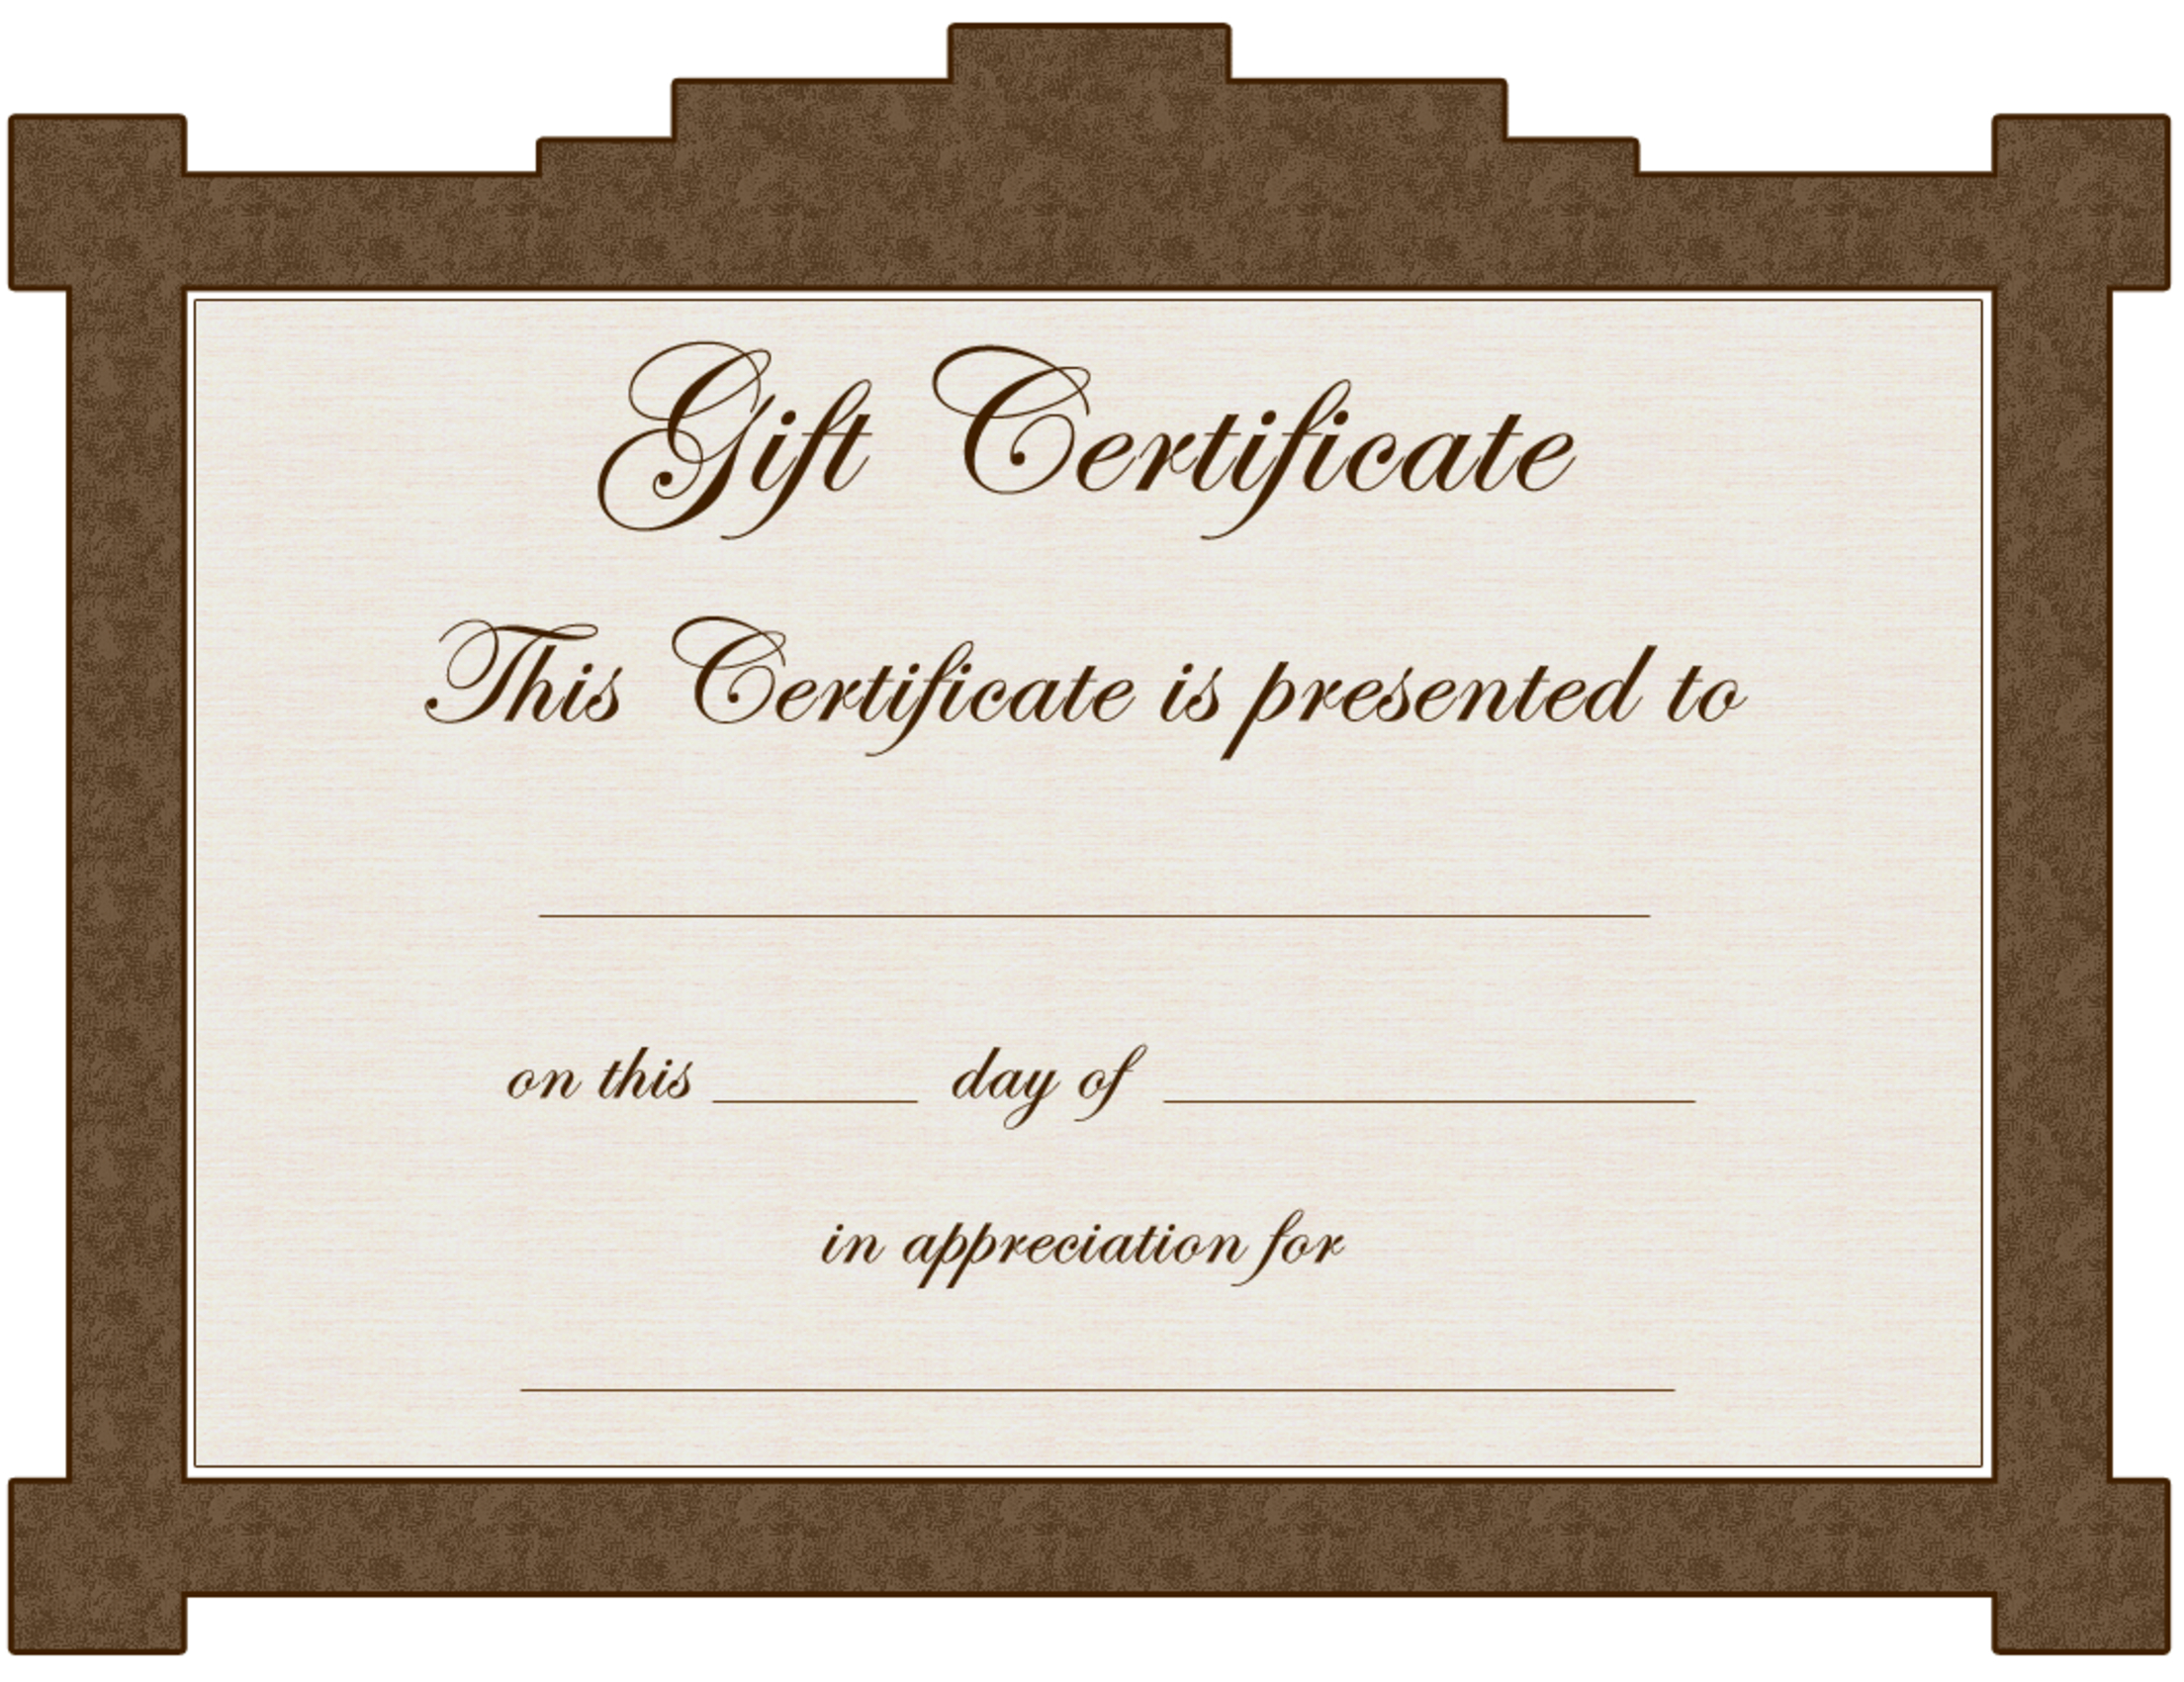 Gift Certificate Templates To Print | Activity Shelter Pertaining To Present Certificate Templates